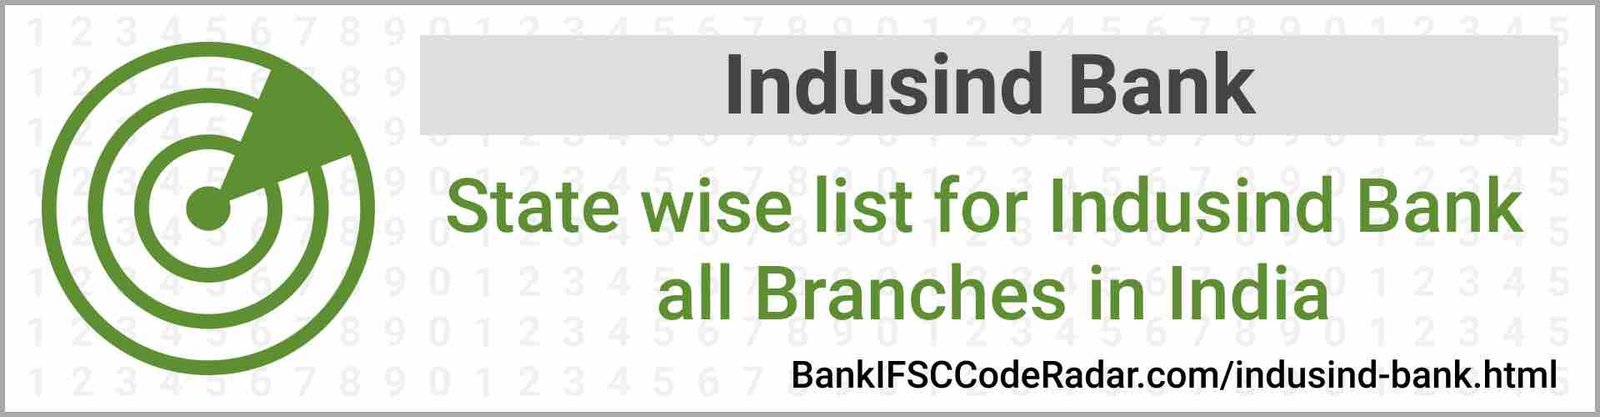 Indusind Bank All Branches India